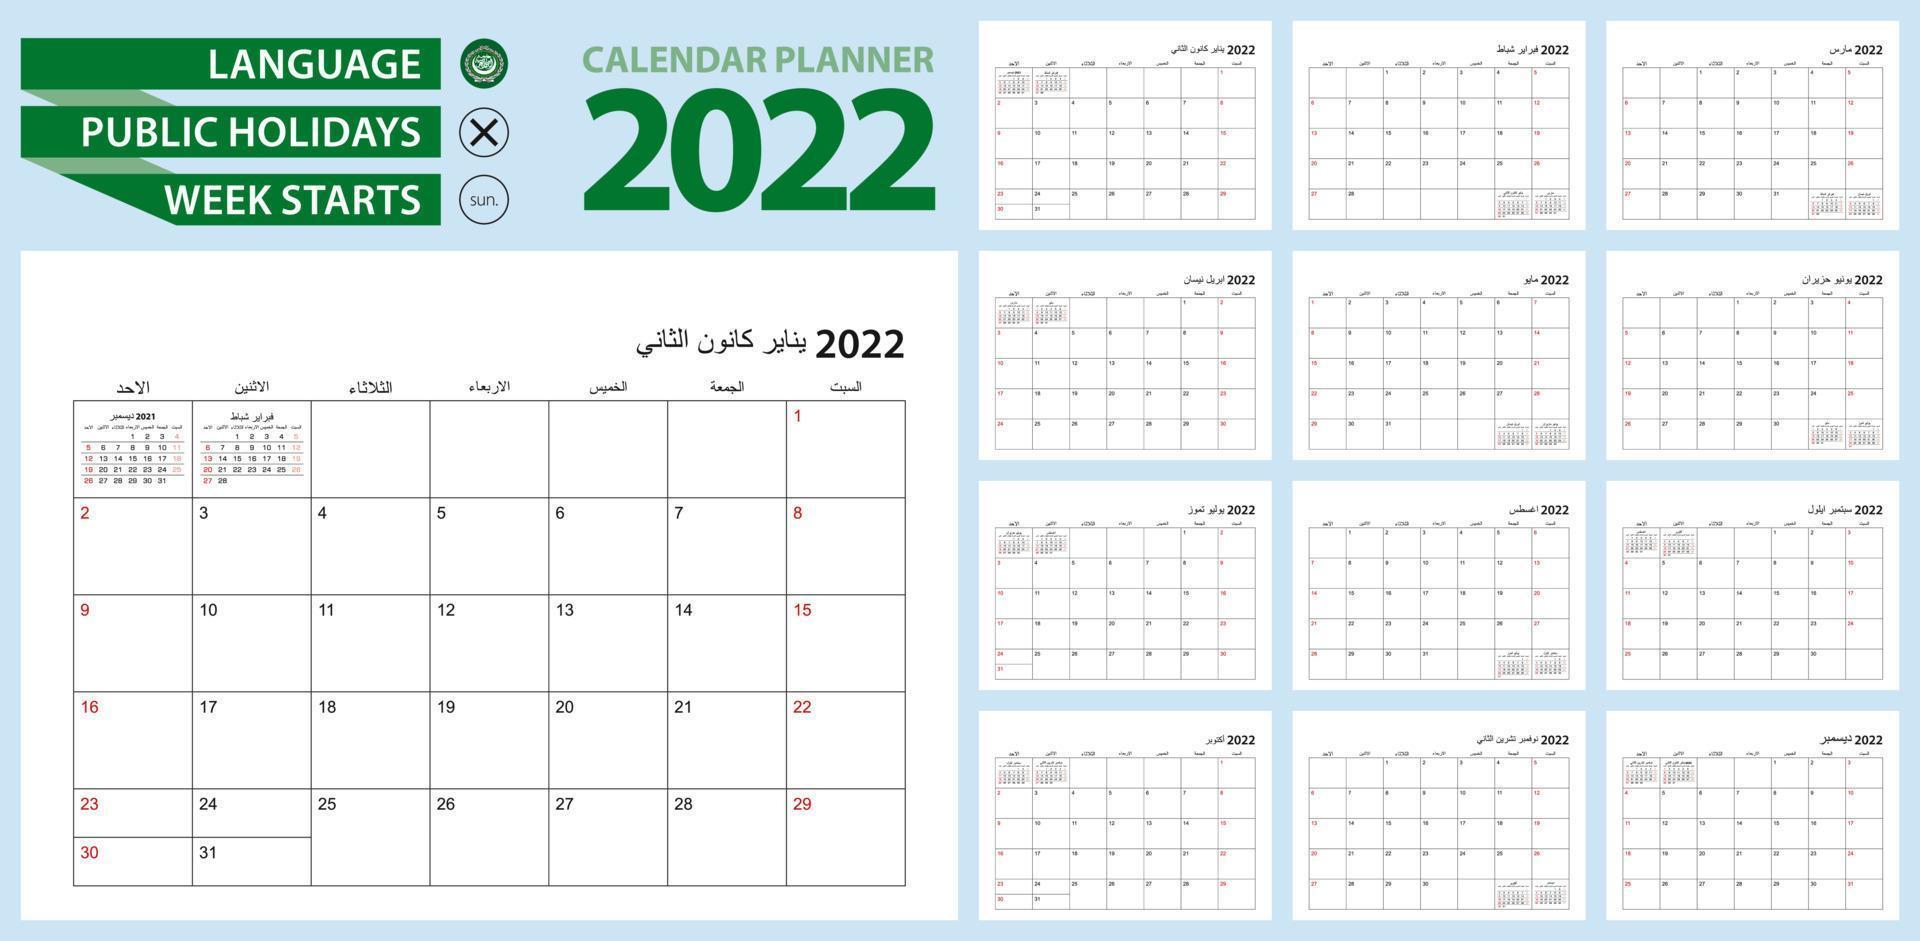 Arabic calendar planner for 2022. Arabic language, week starts from Sunday. Vector template.